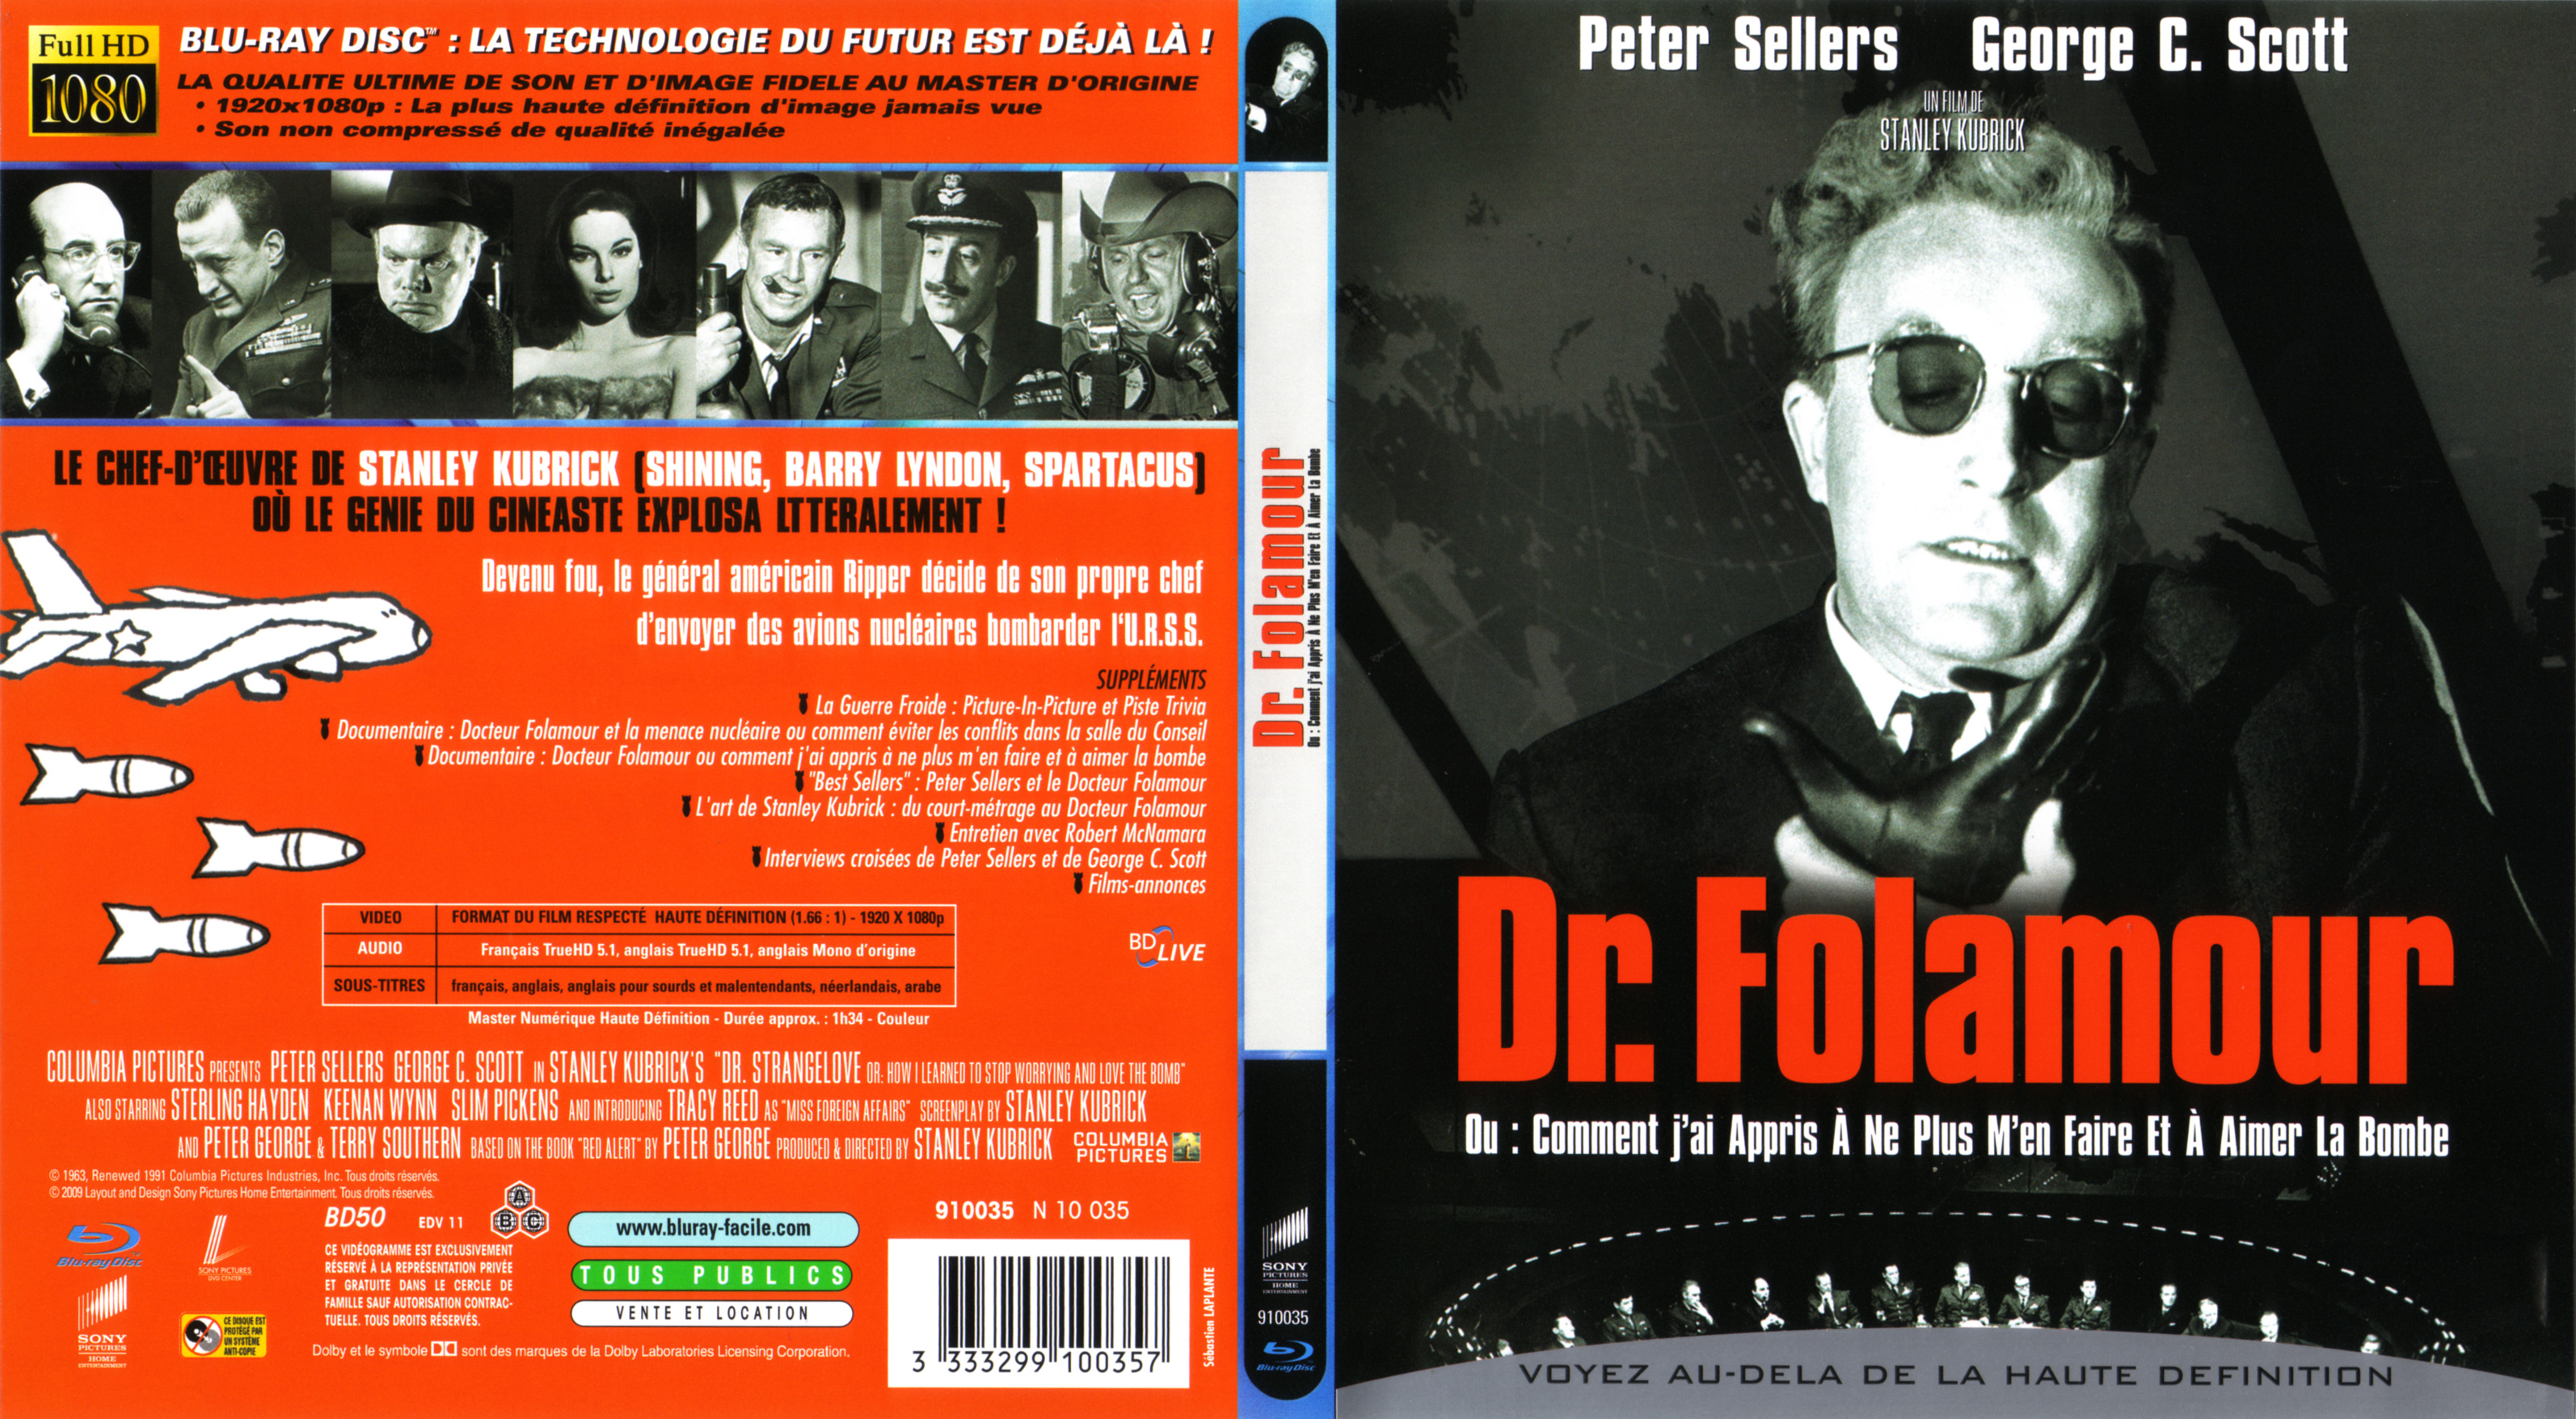 Jaquette DVD Dr Folamour (BLU-RAY)